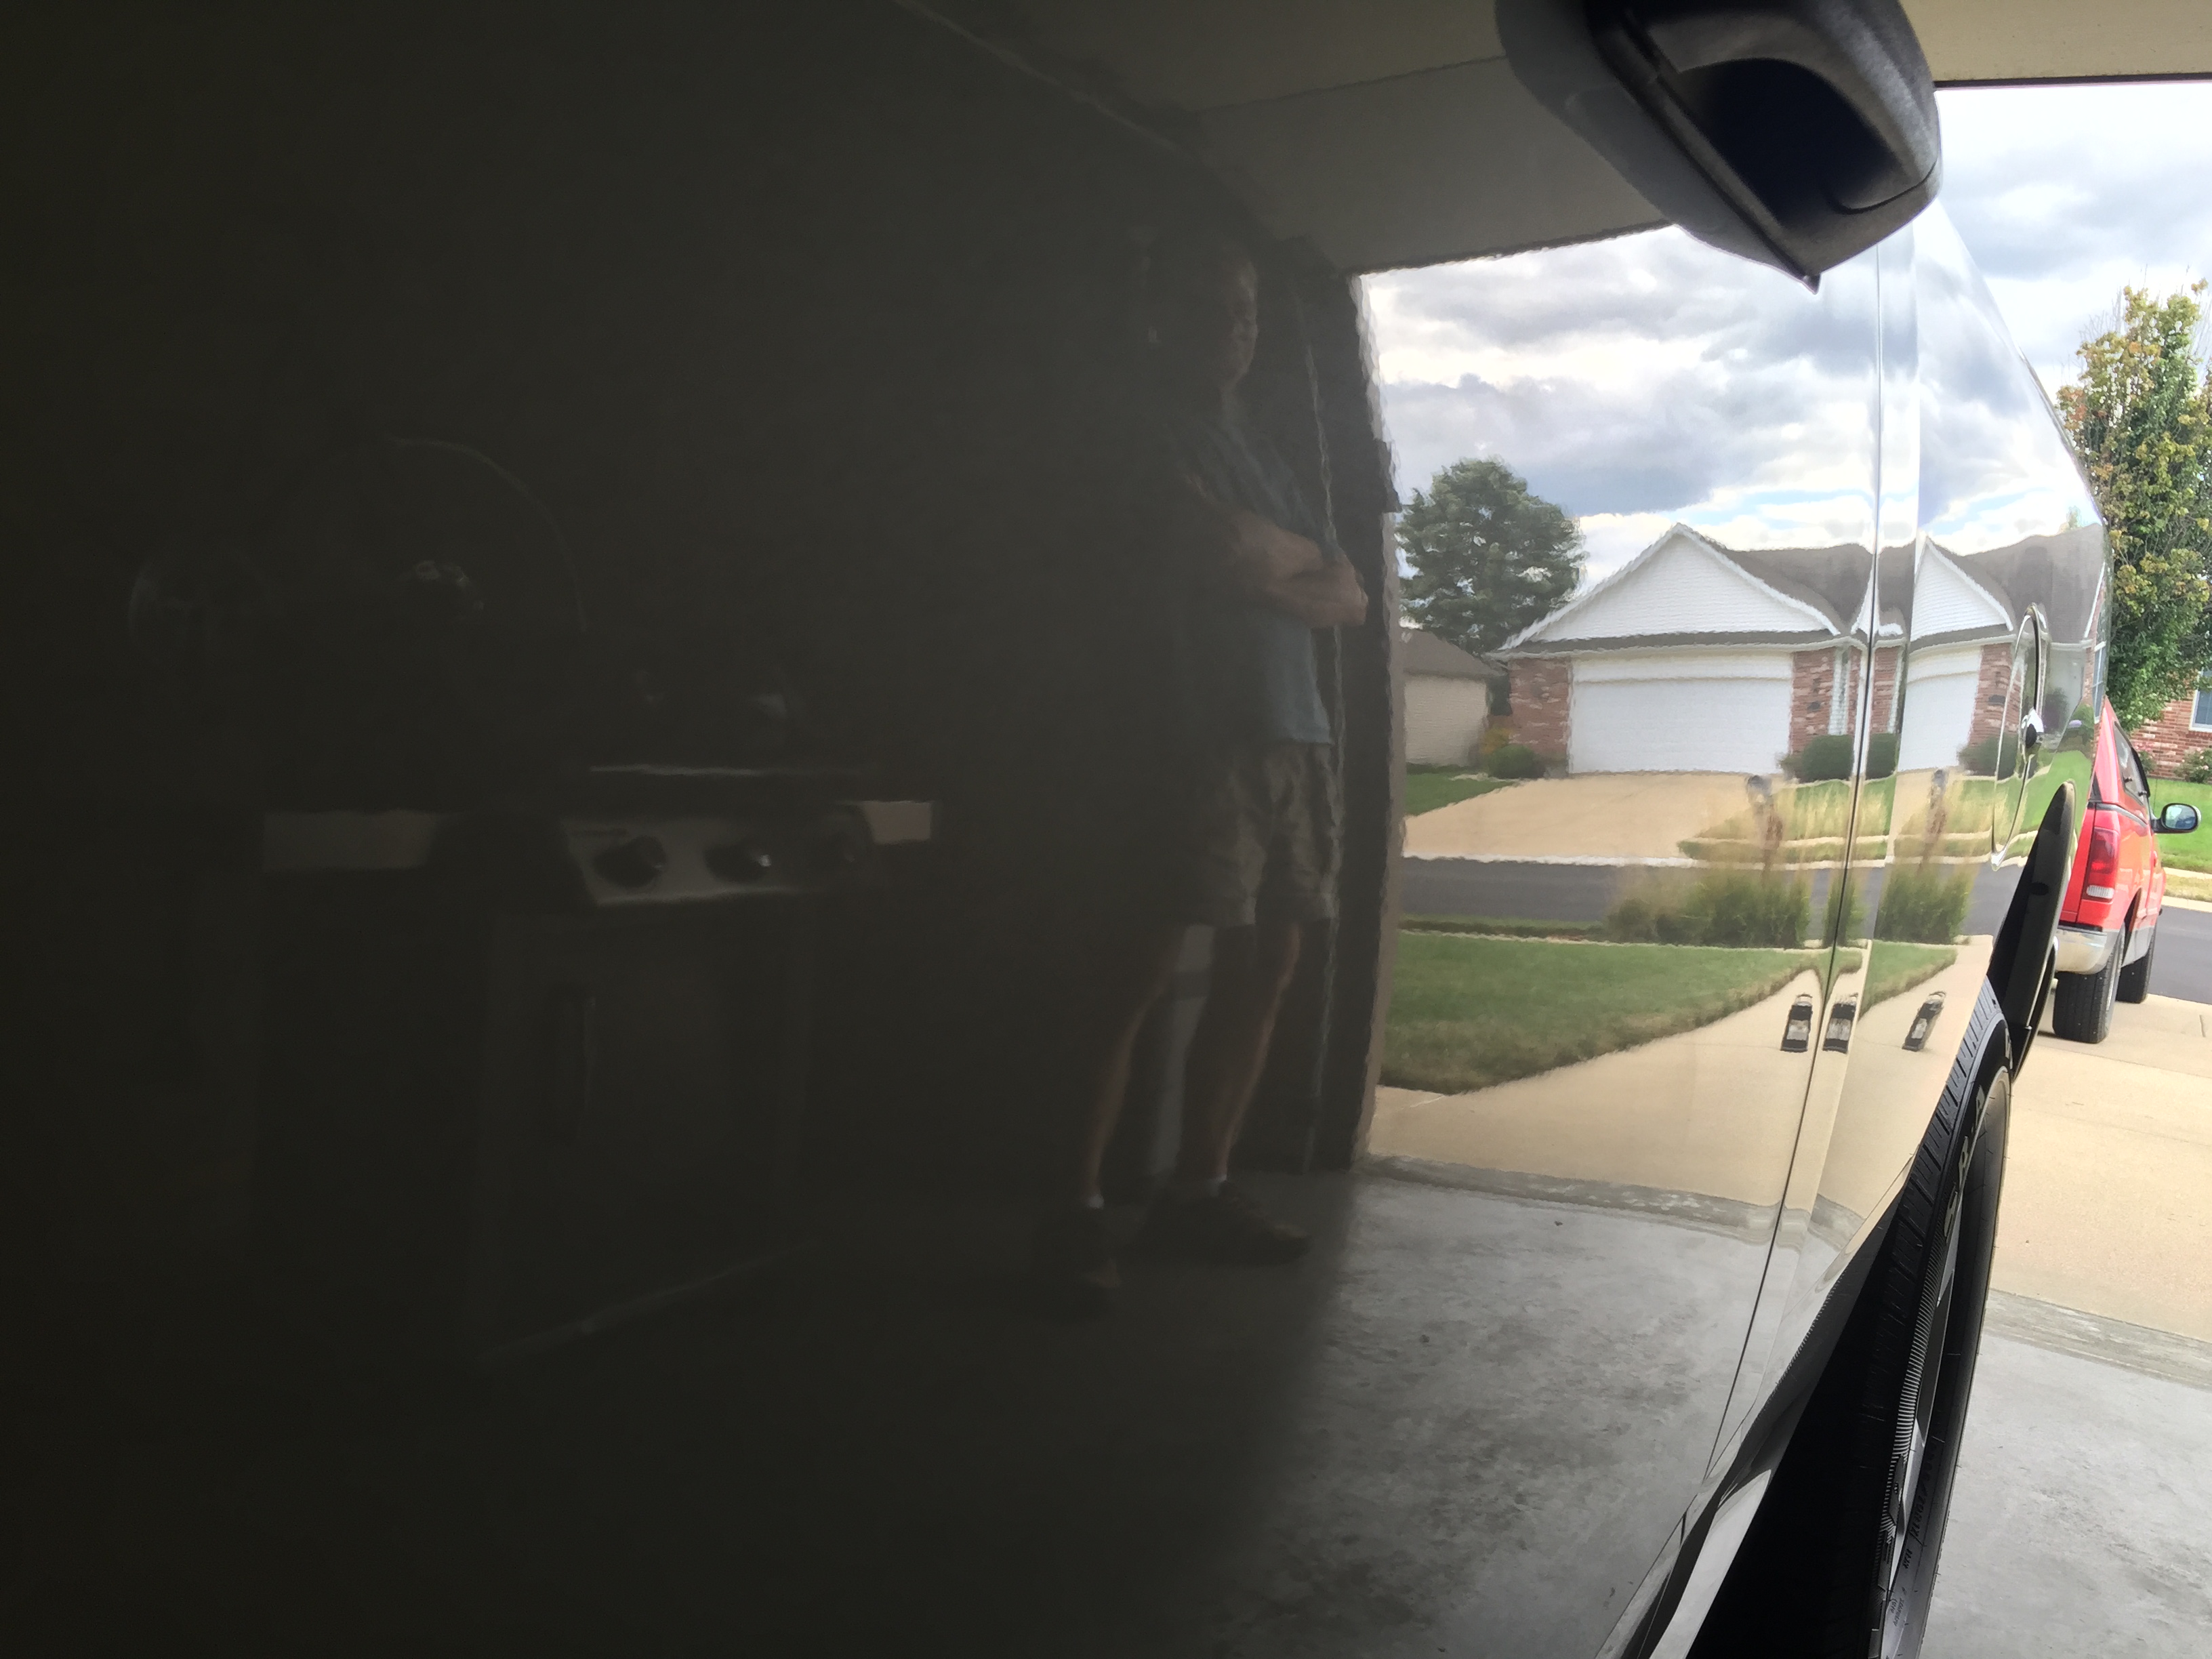 2015 Dodge Ram Dent Removal, Springfield, IL. Dent in drivers door, http://217dent.com